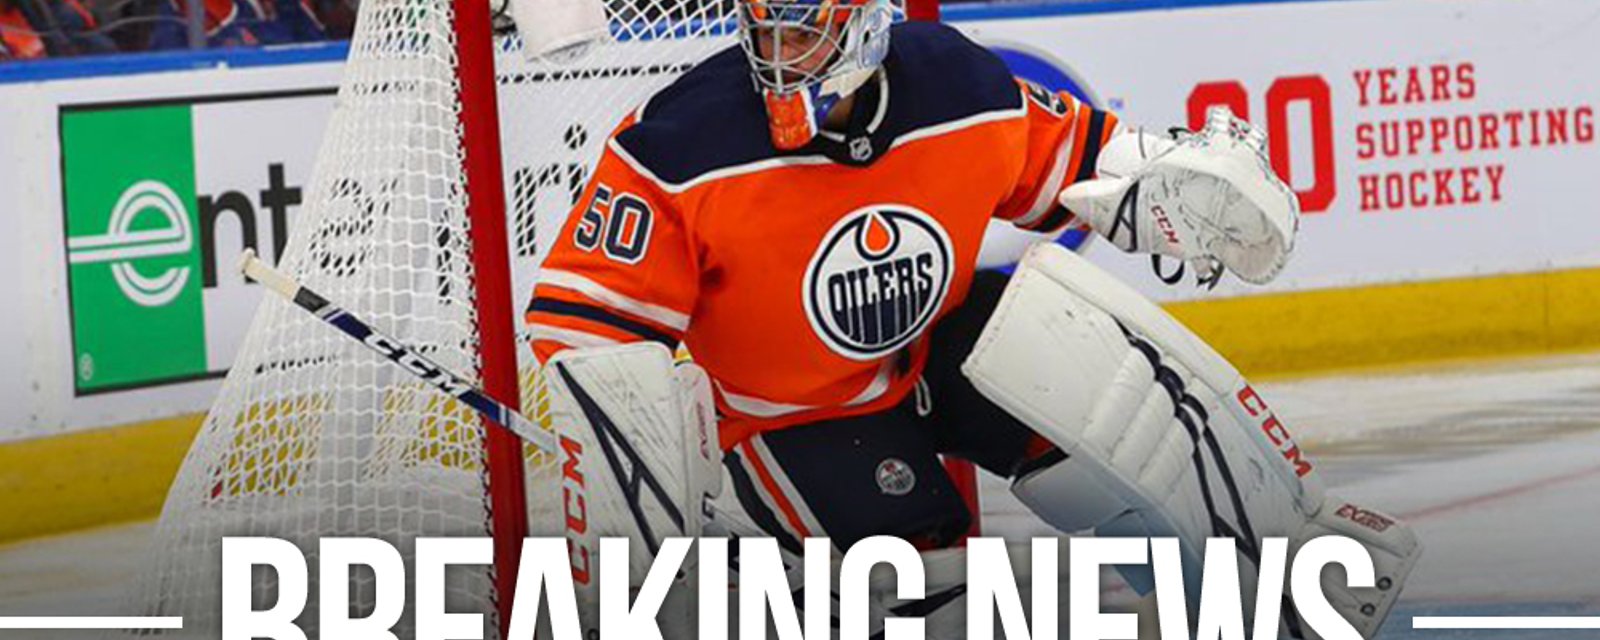 Oilers forced to use emergency recall on goalie Skinner after presumed injury